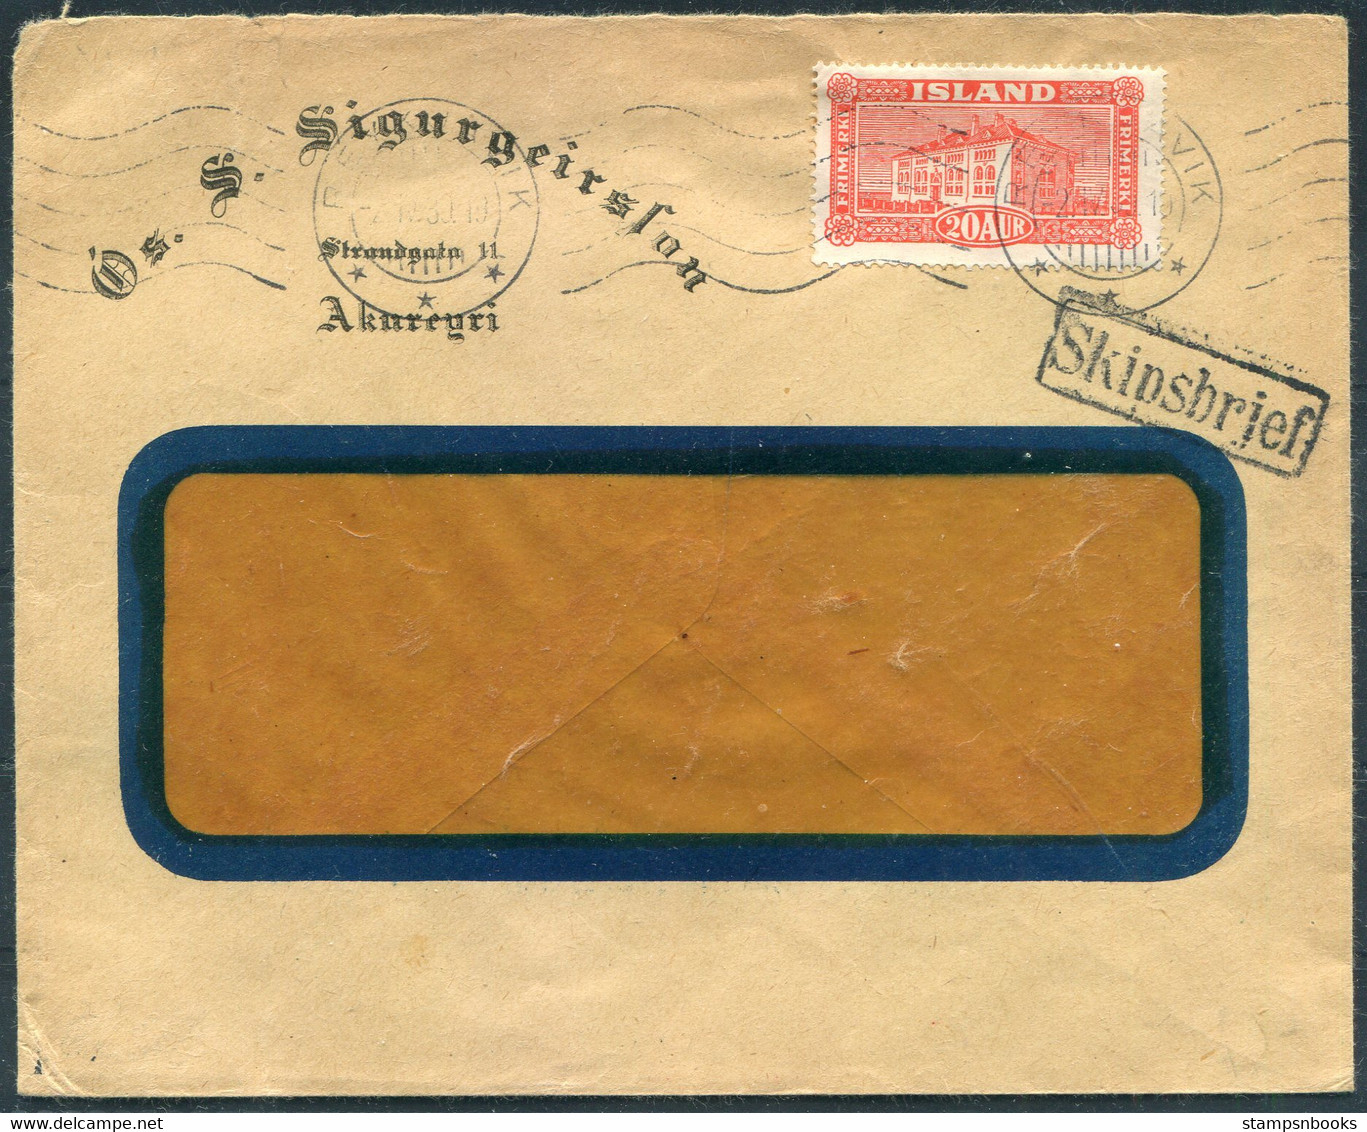 1930 Iceland 20 Aur National Library Skipsbrjef Cover. Ship Paquebot - Covers & Documents